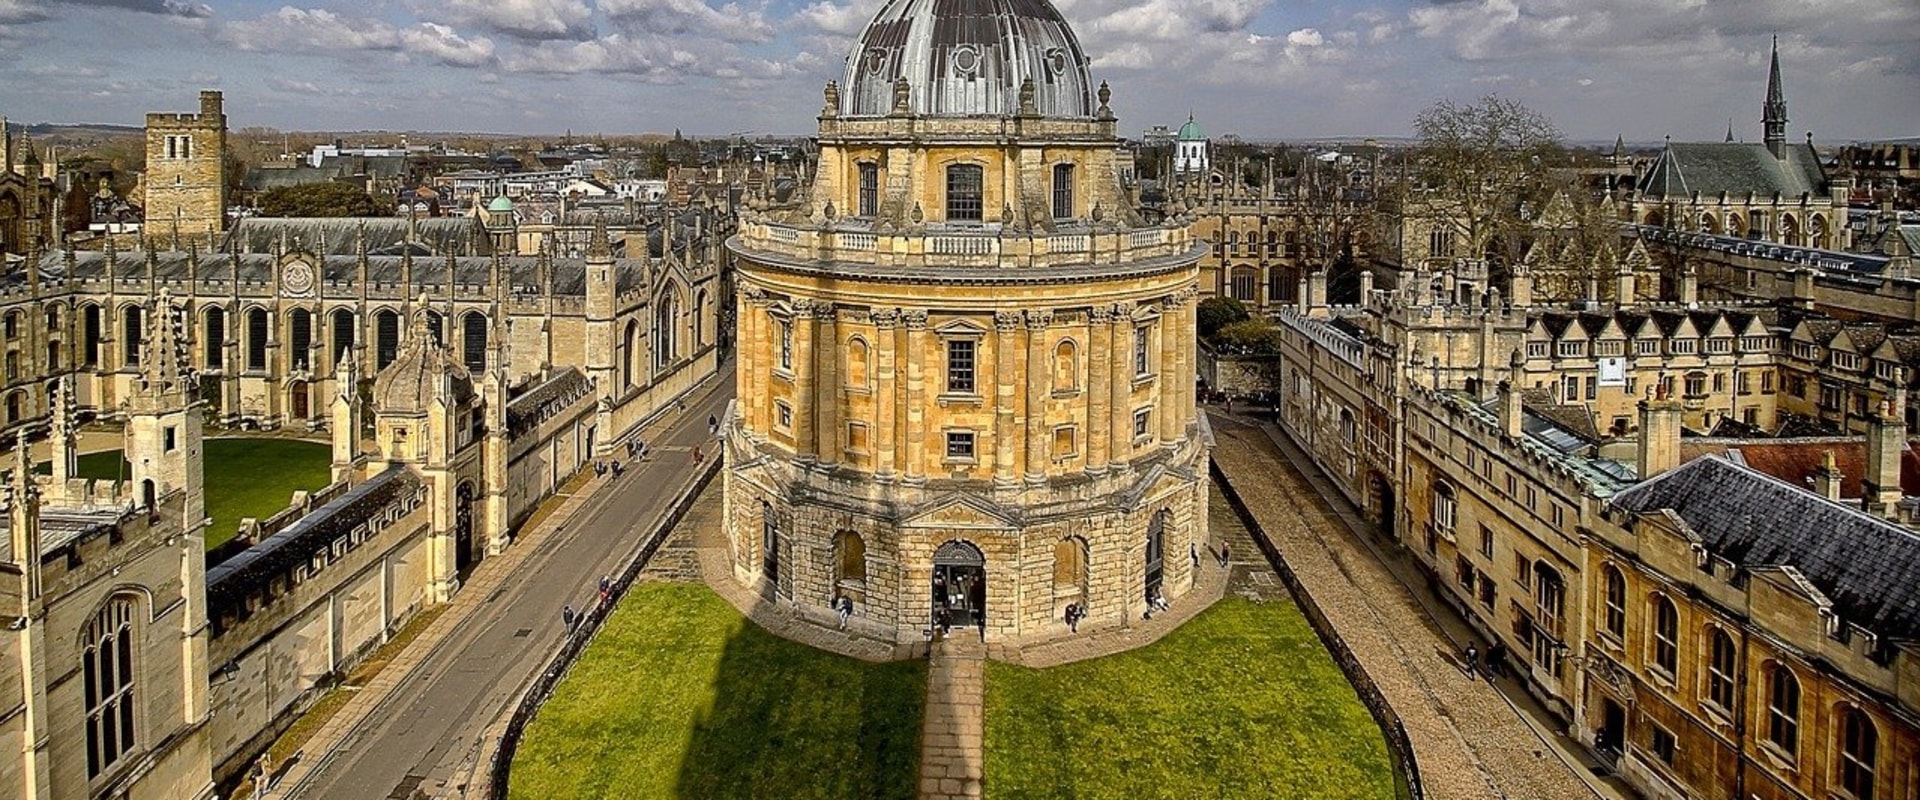 GCSEs Required for Oxbridge Entry